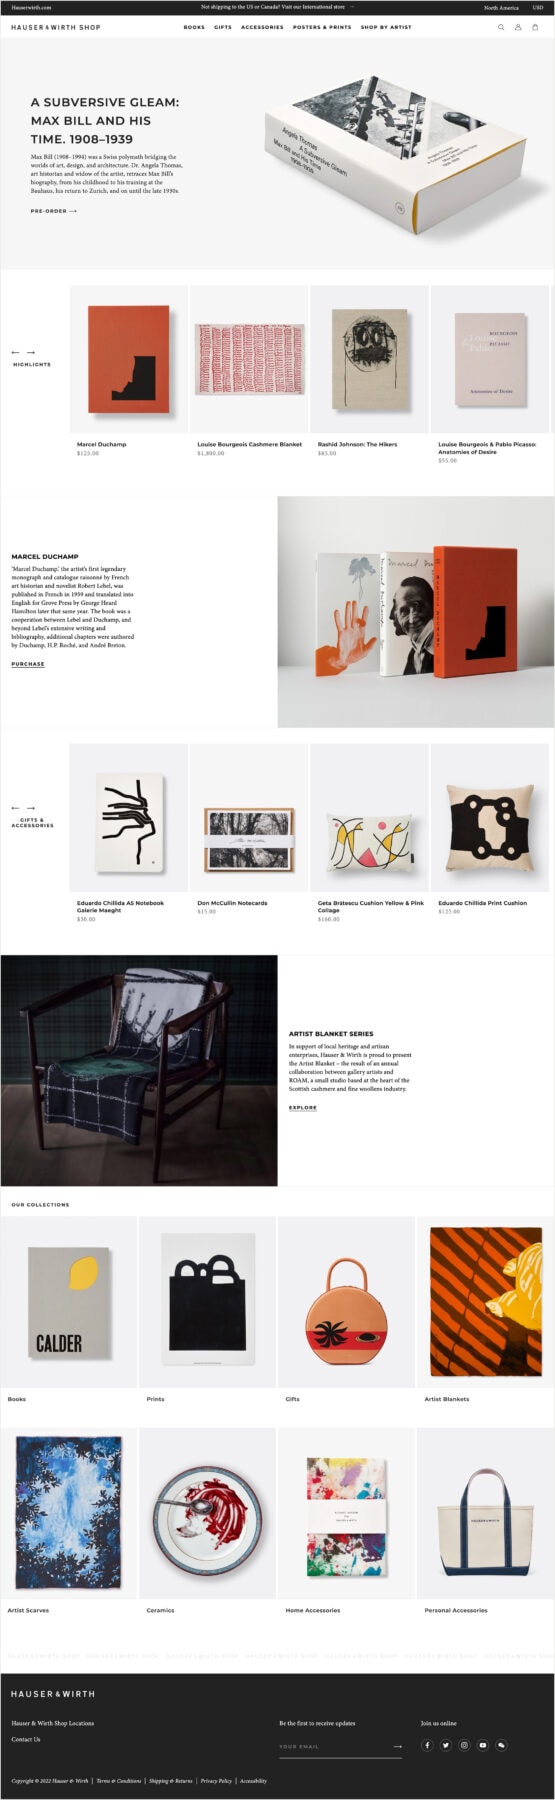 HAUSER & WIRTH Shopify Ecommerce - Sweden Unlimited